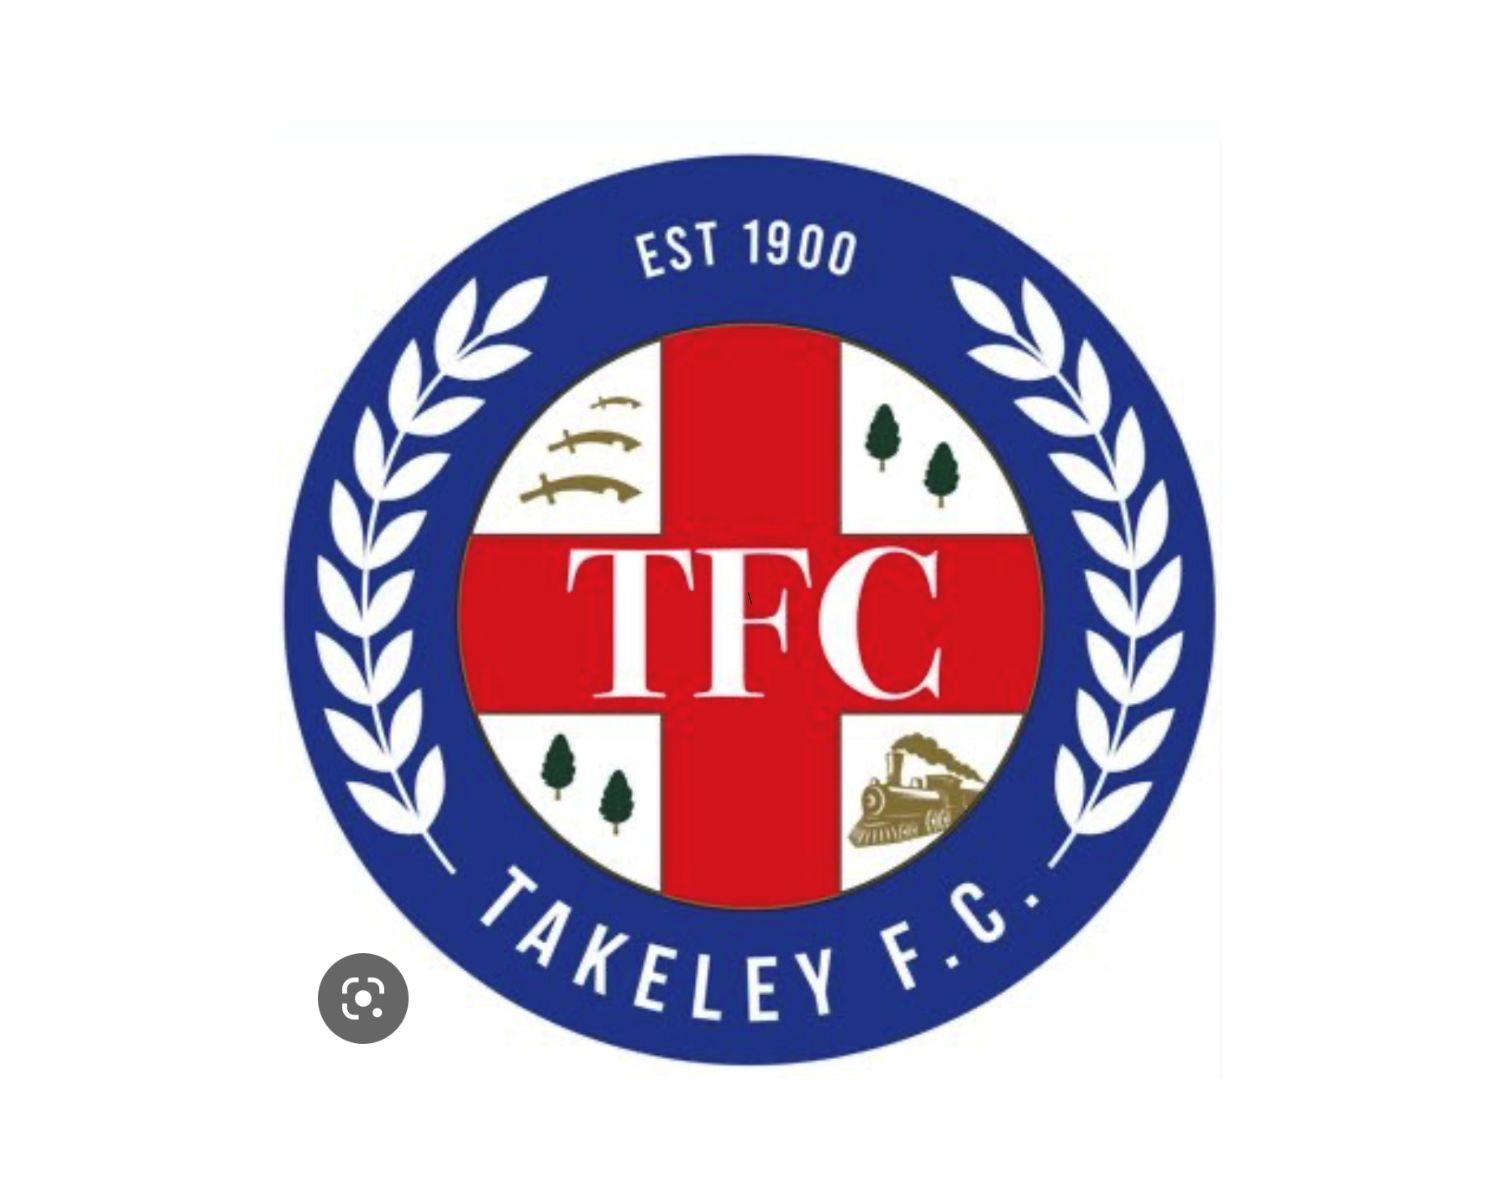 takeley-fc-11-football-club-facts